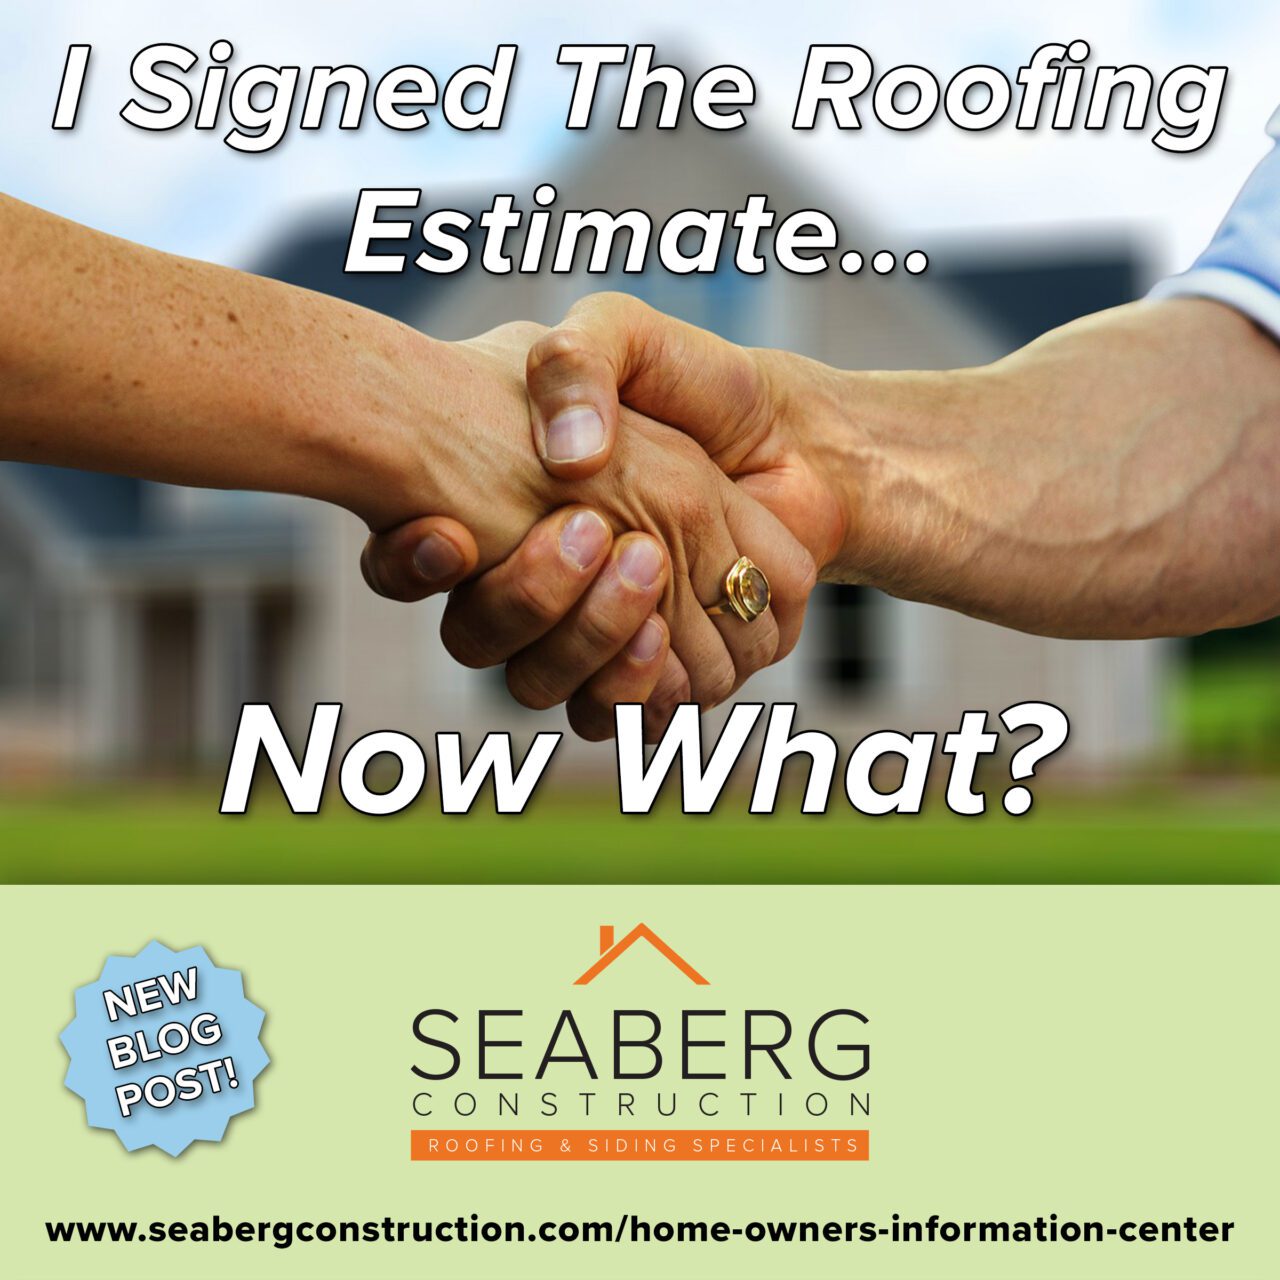 Seaberg Construction Blog: I Signed The Roofing Estimate Now What?